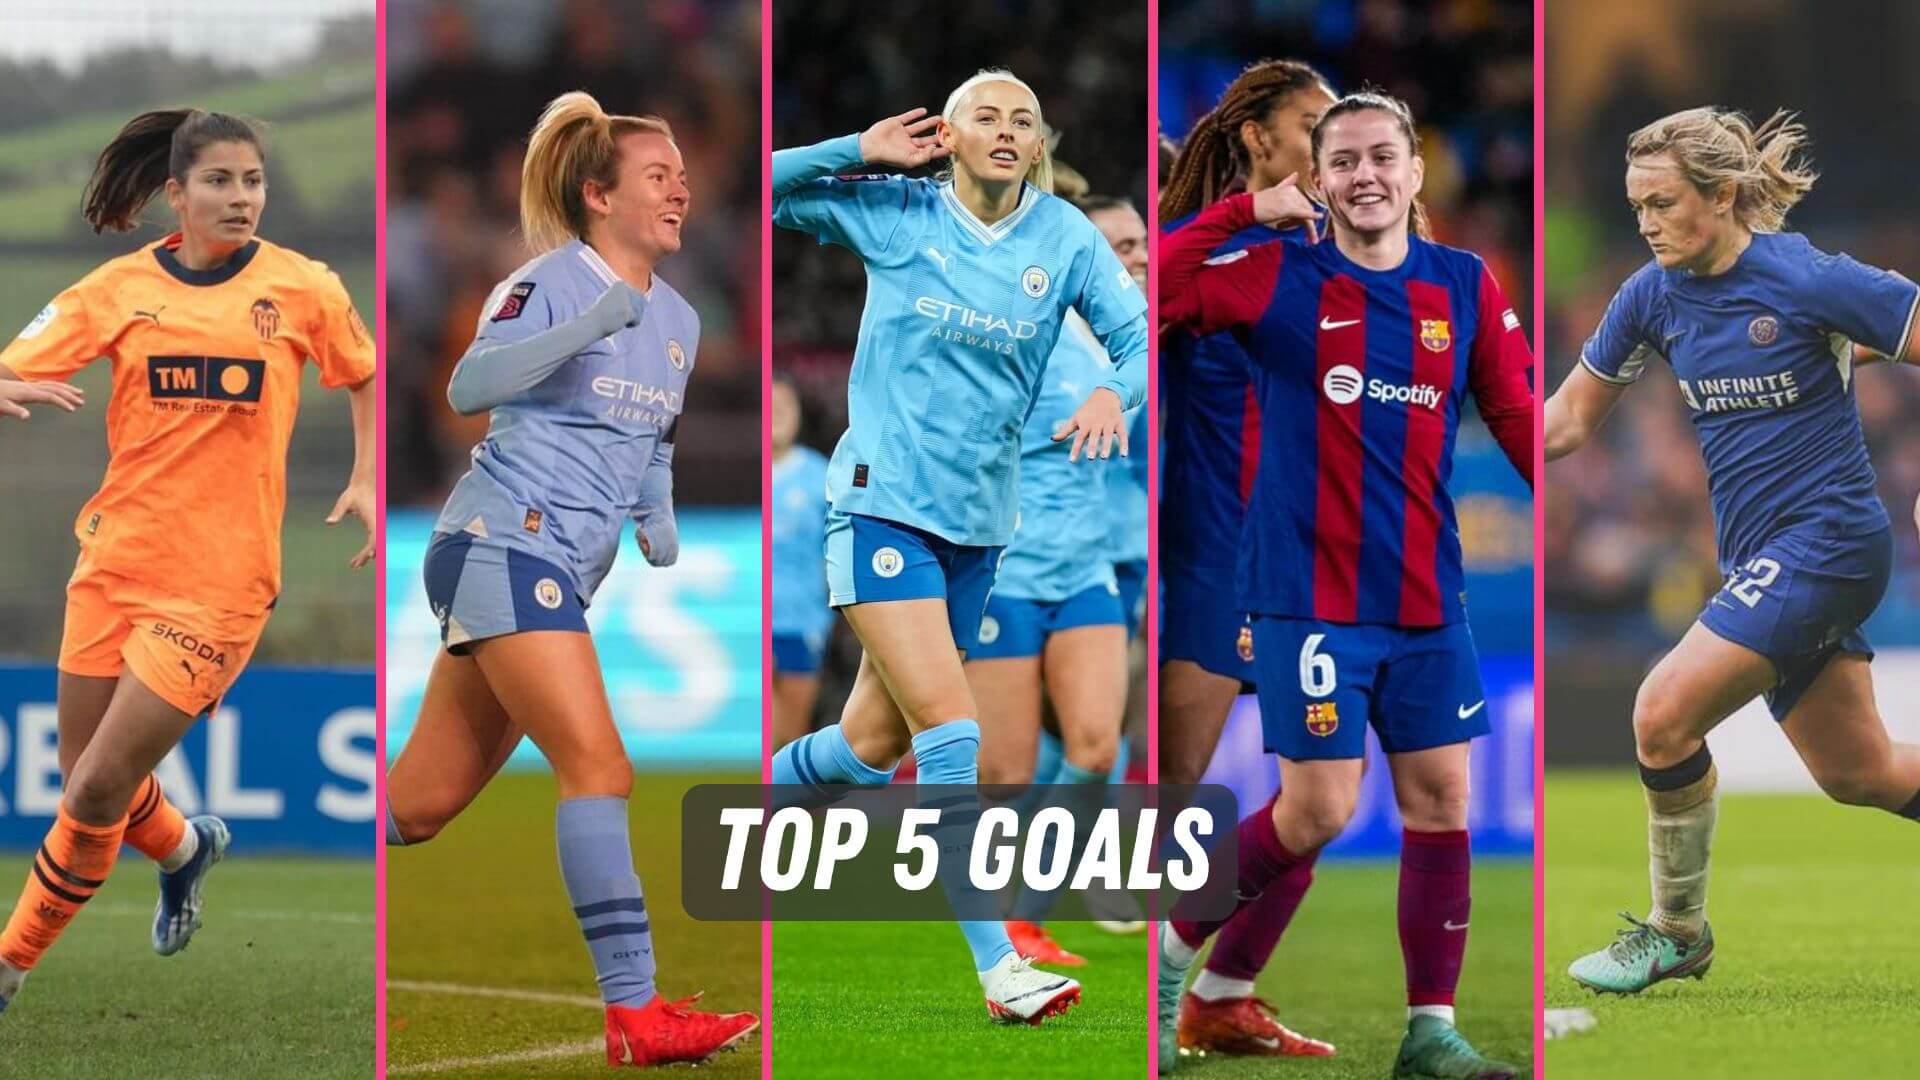 The best goals from Liga F and the WSL